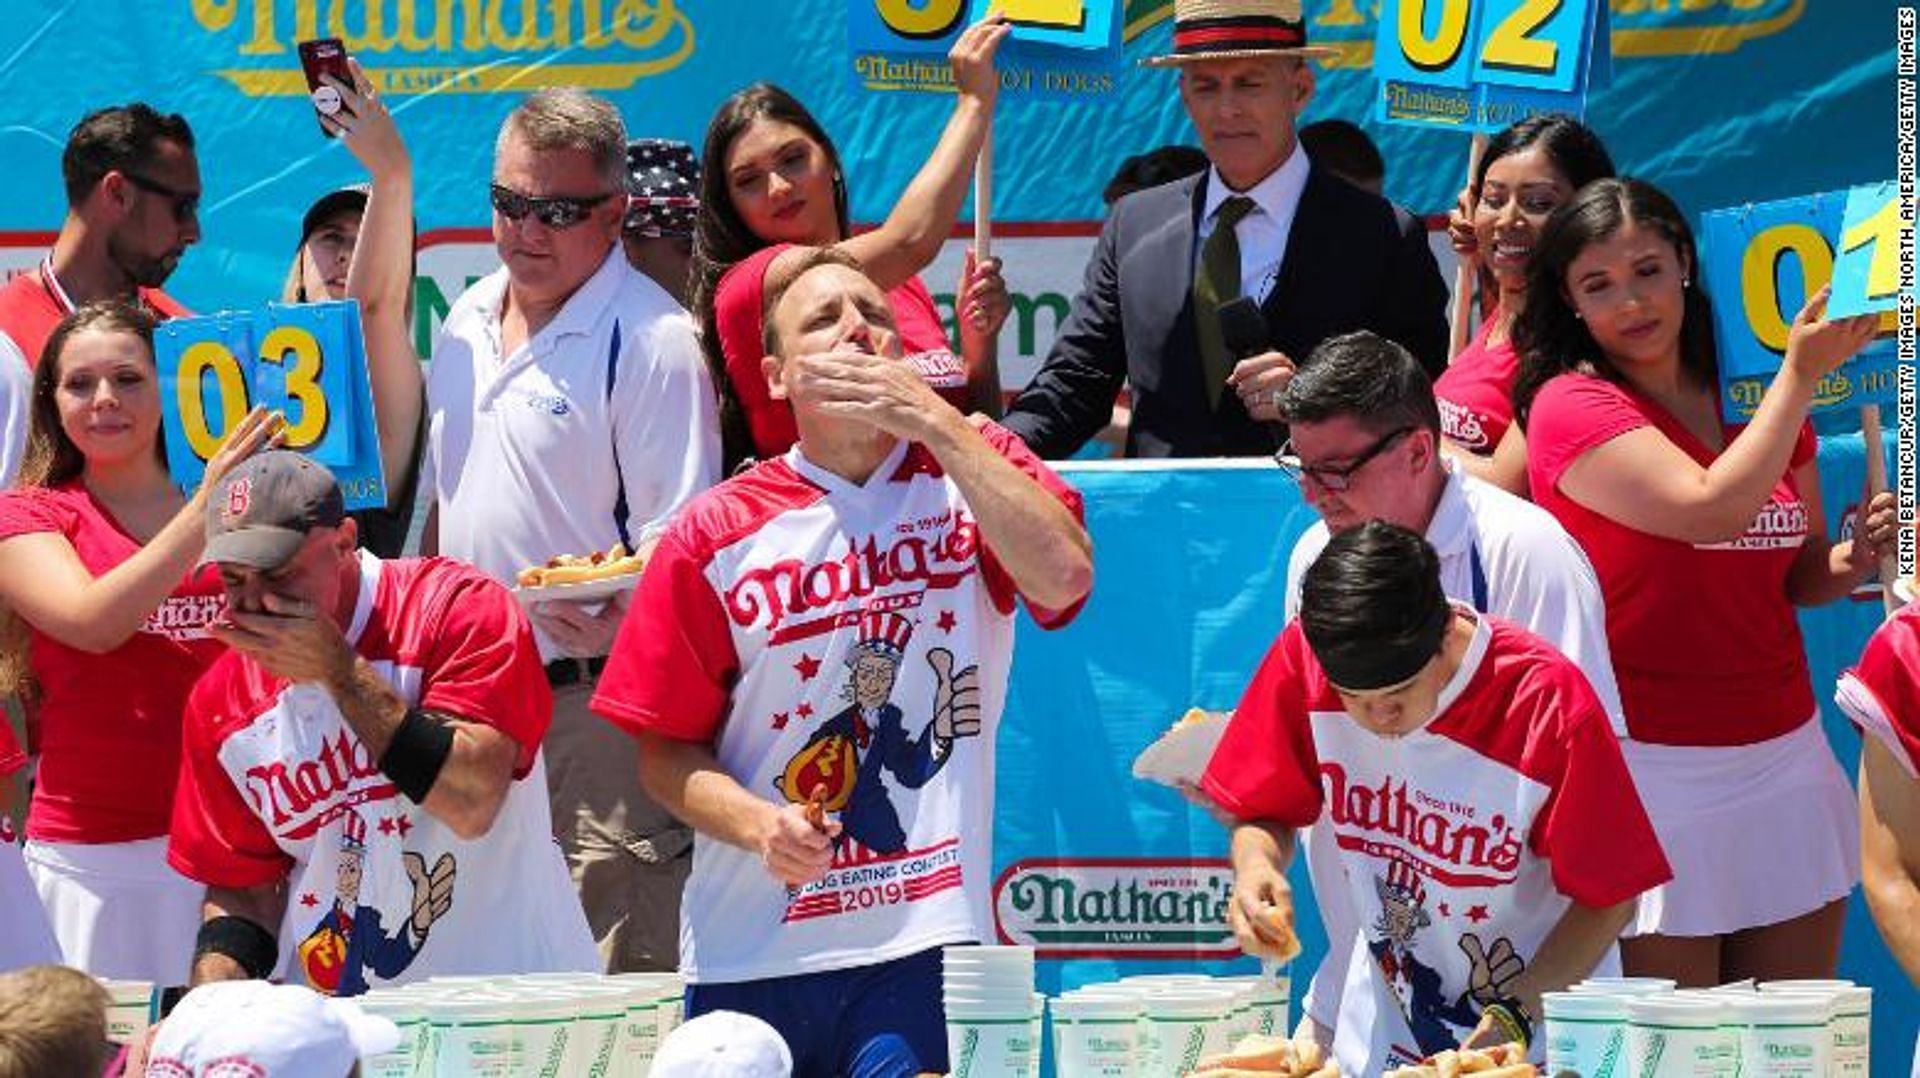 Nathan&#039;s Hot Dog Eating Championship is back with crazy rules (Image via ESPN)